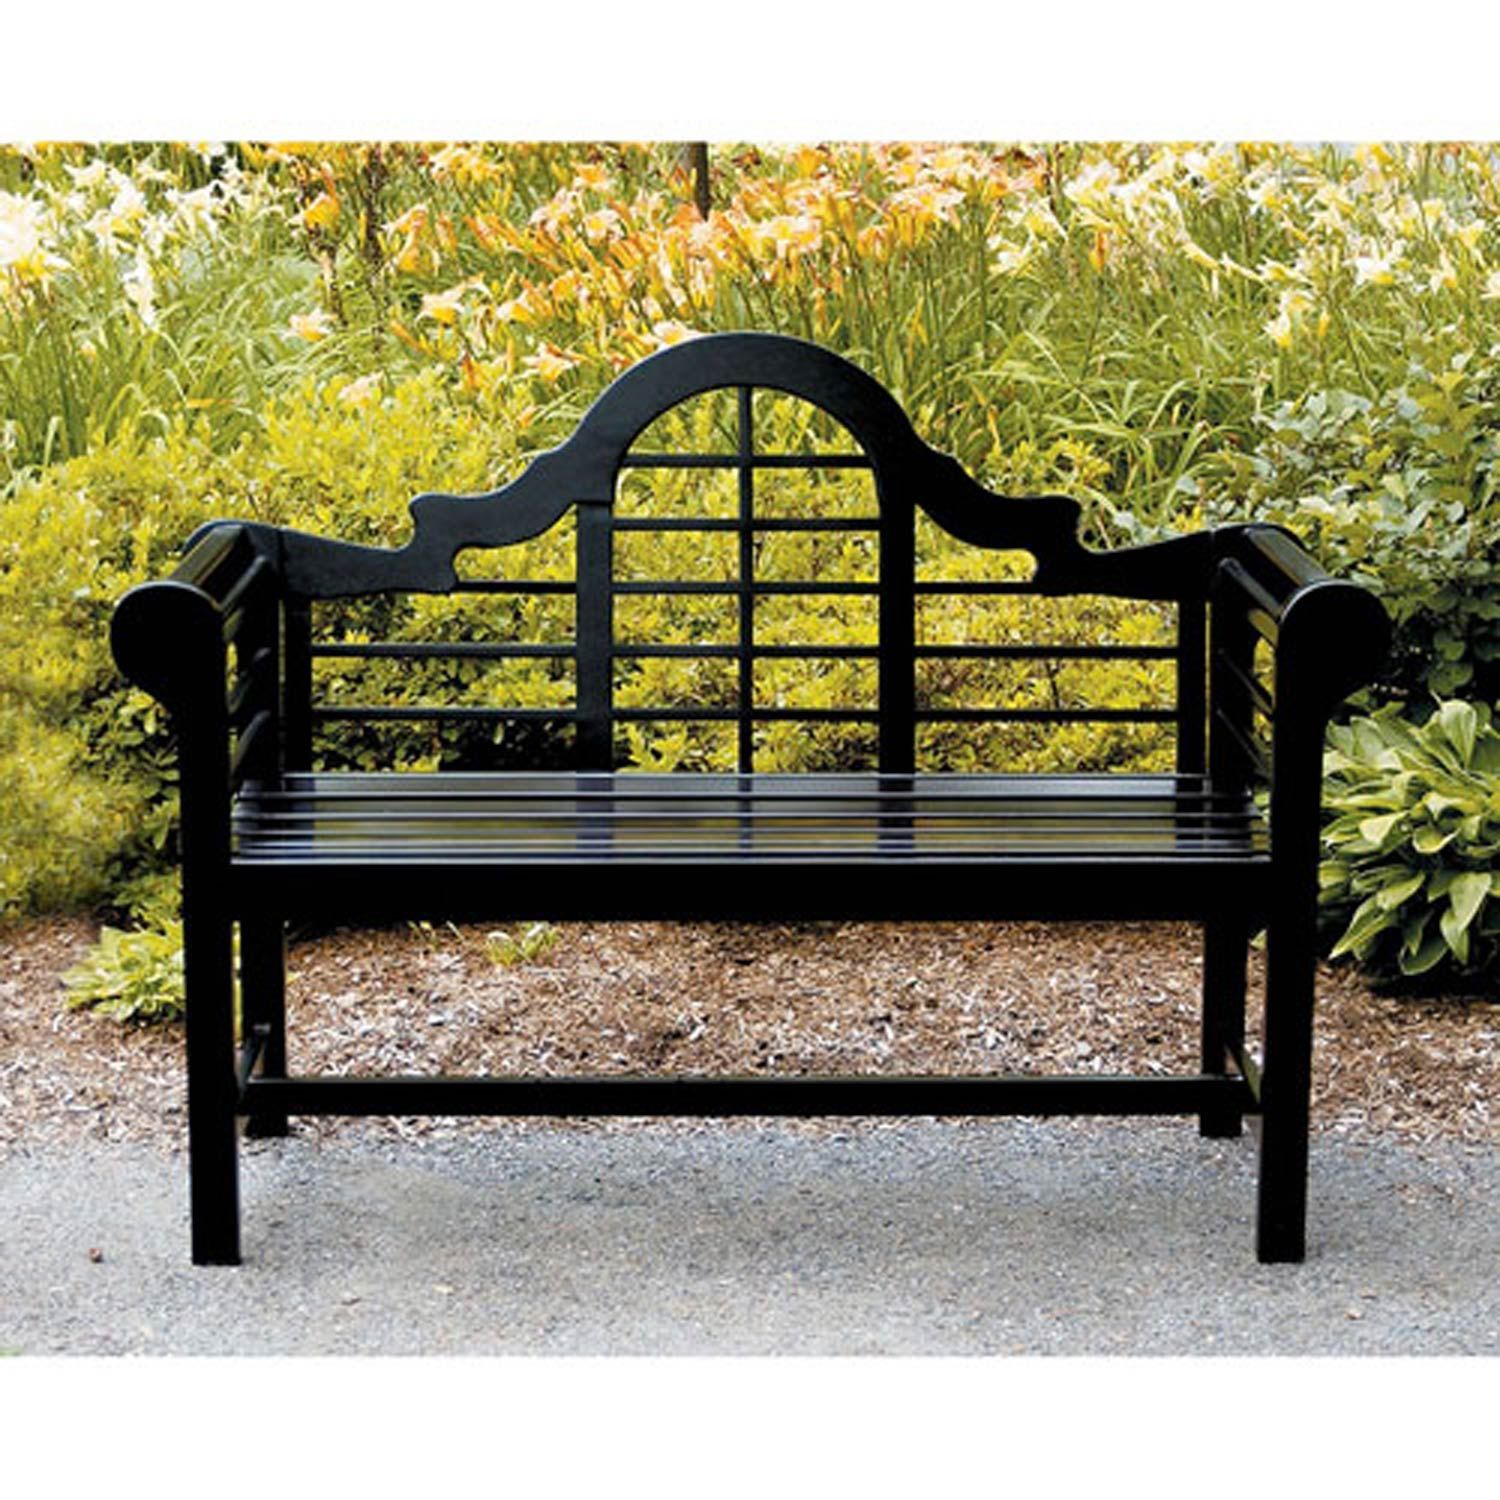 Achla Designs Lutyens Black Bench Ofb 11 | Wooden Bench Outdoor Intended For Black Eucalyptus Outdoor Patio Seating Sets (View 7 of 15)